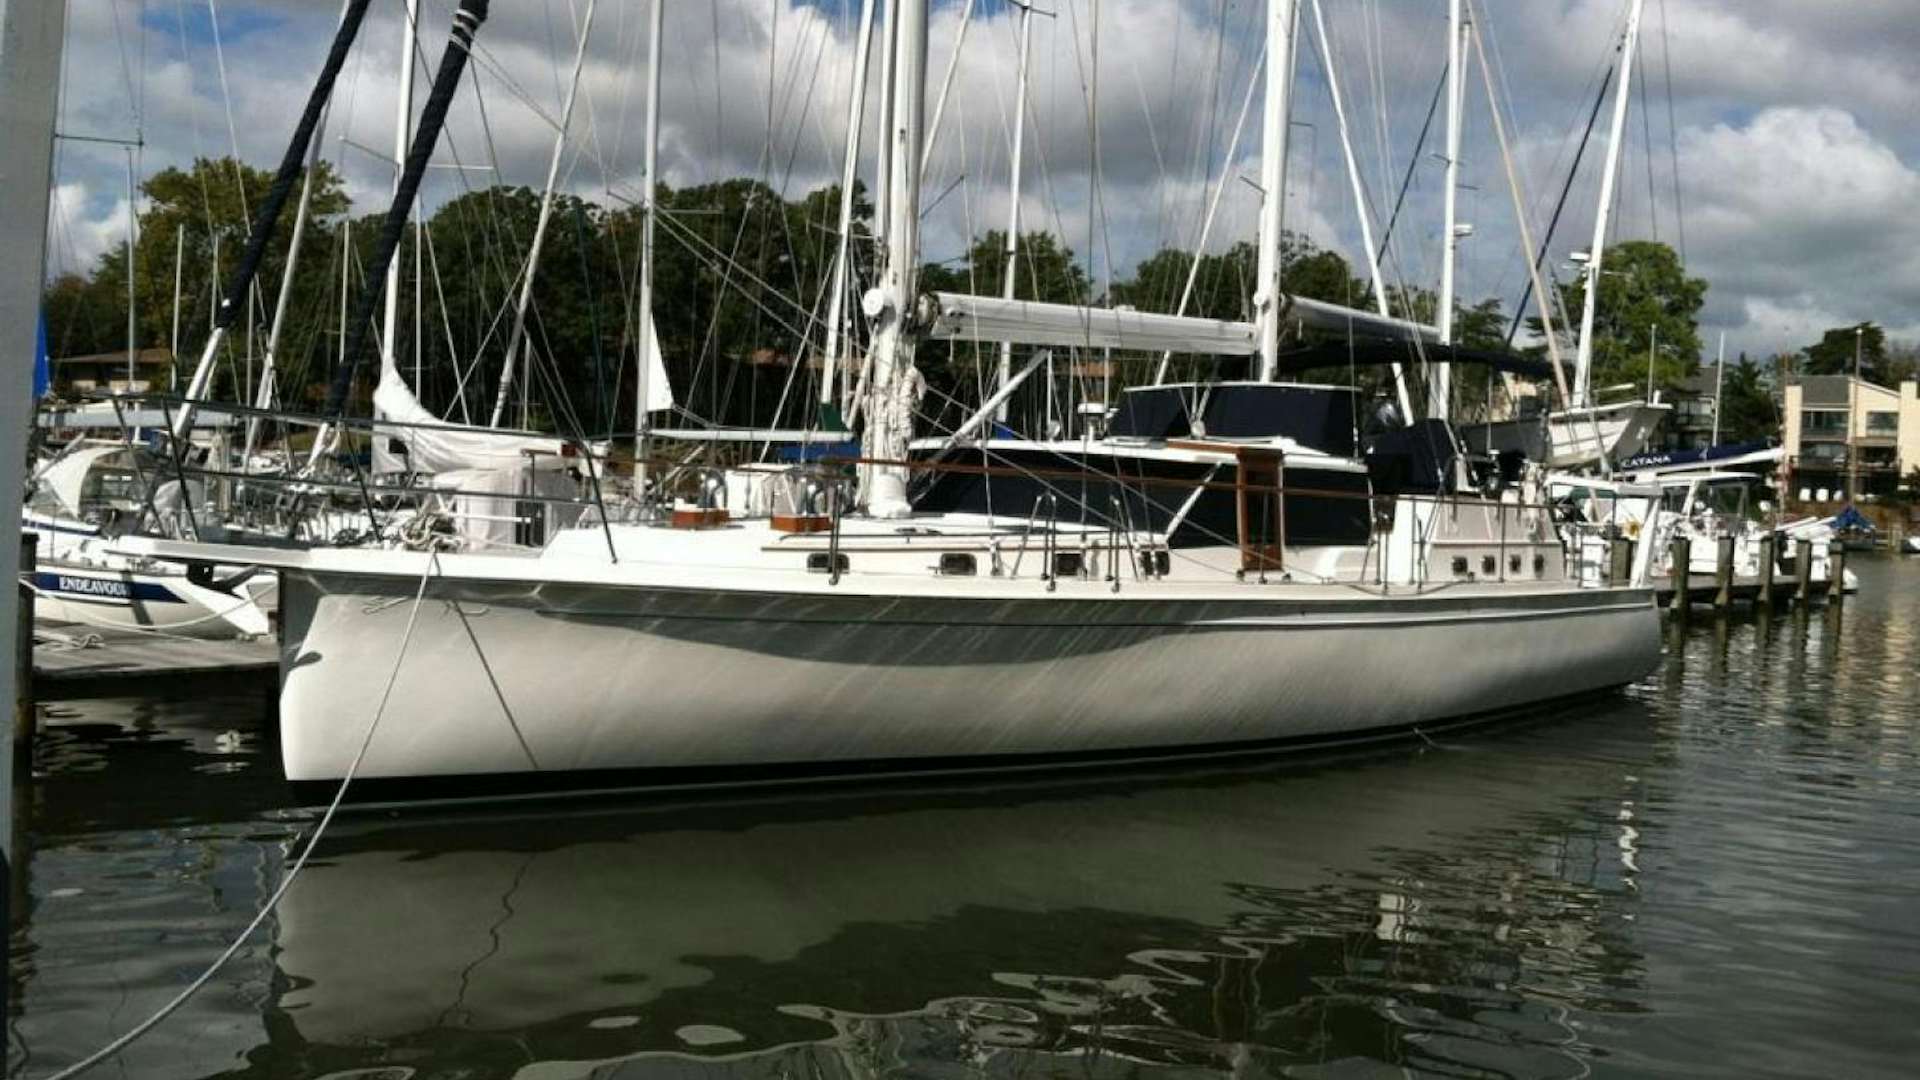 The harlen wood
Yacht for Sale